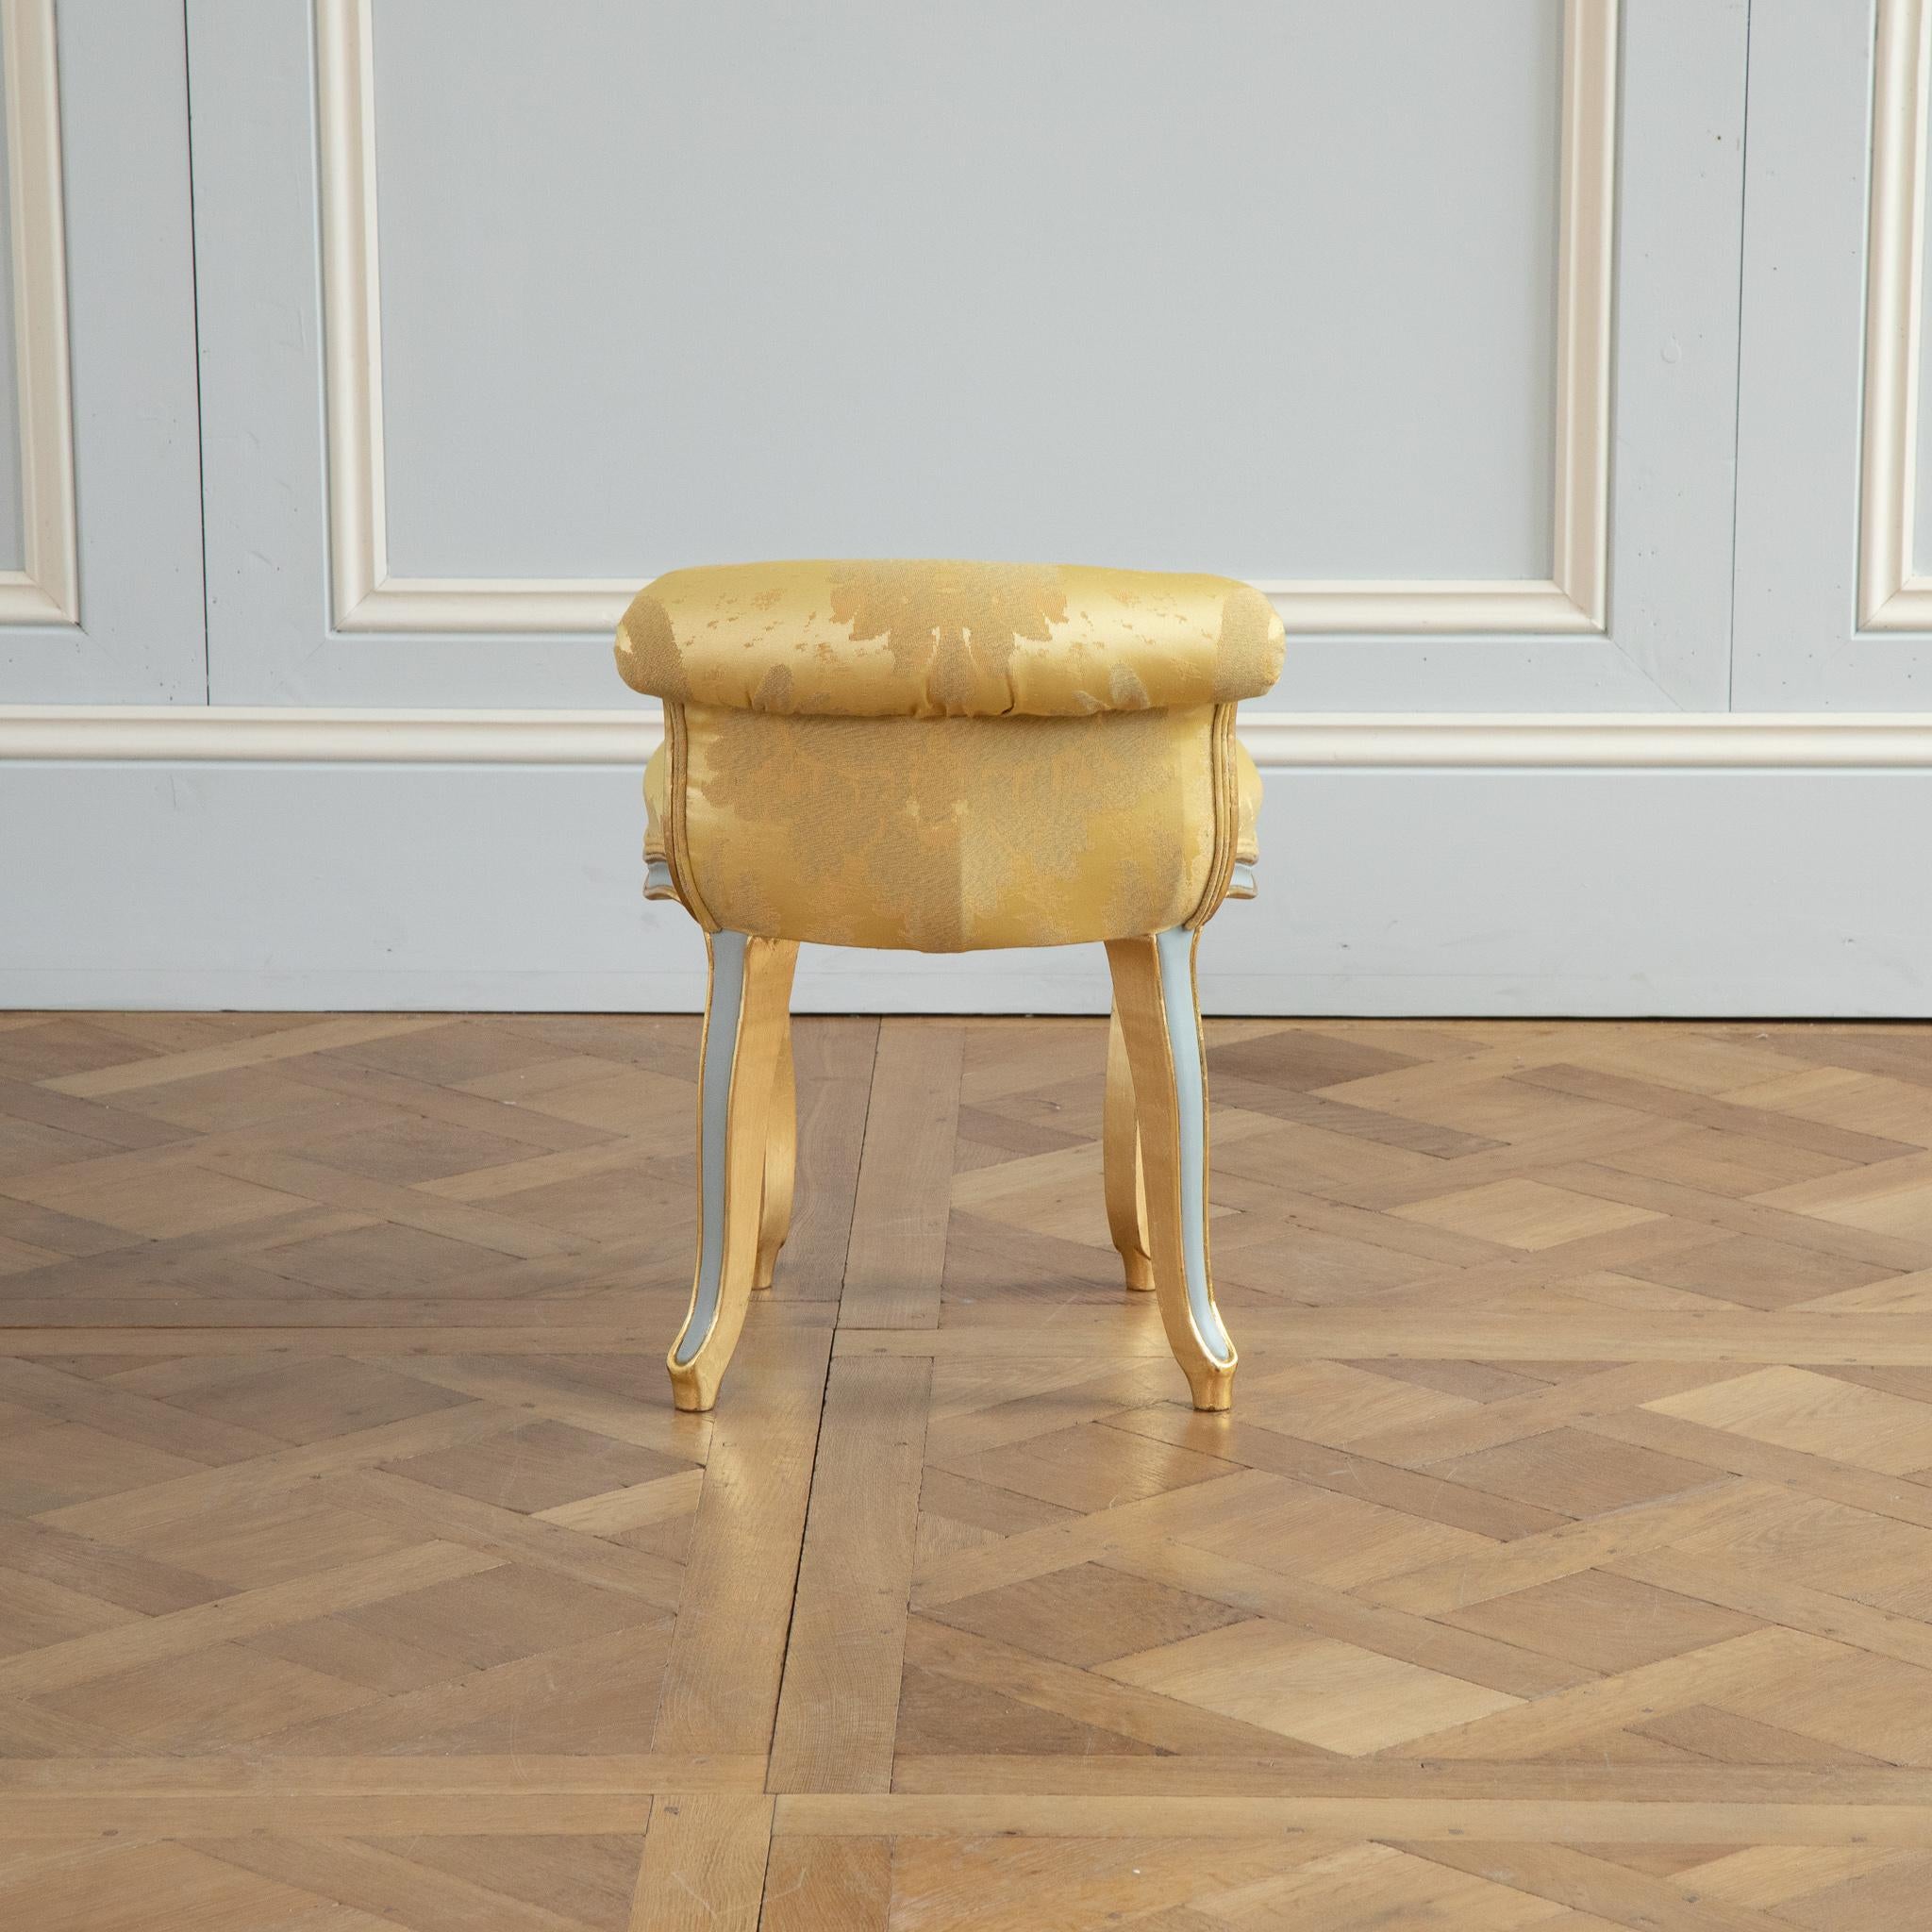 Louis XVI Crosse Renverse Stool Painted with Gold Highlights In Excellent Condition For Sale In London, Park Royal